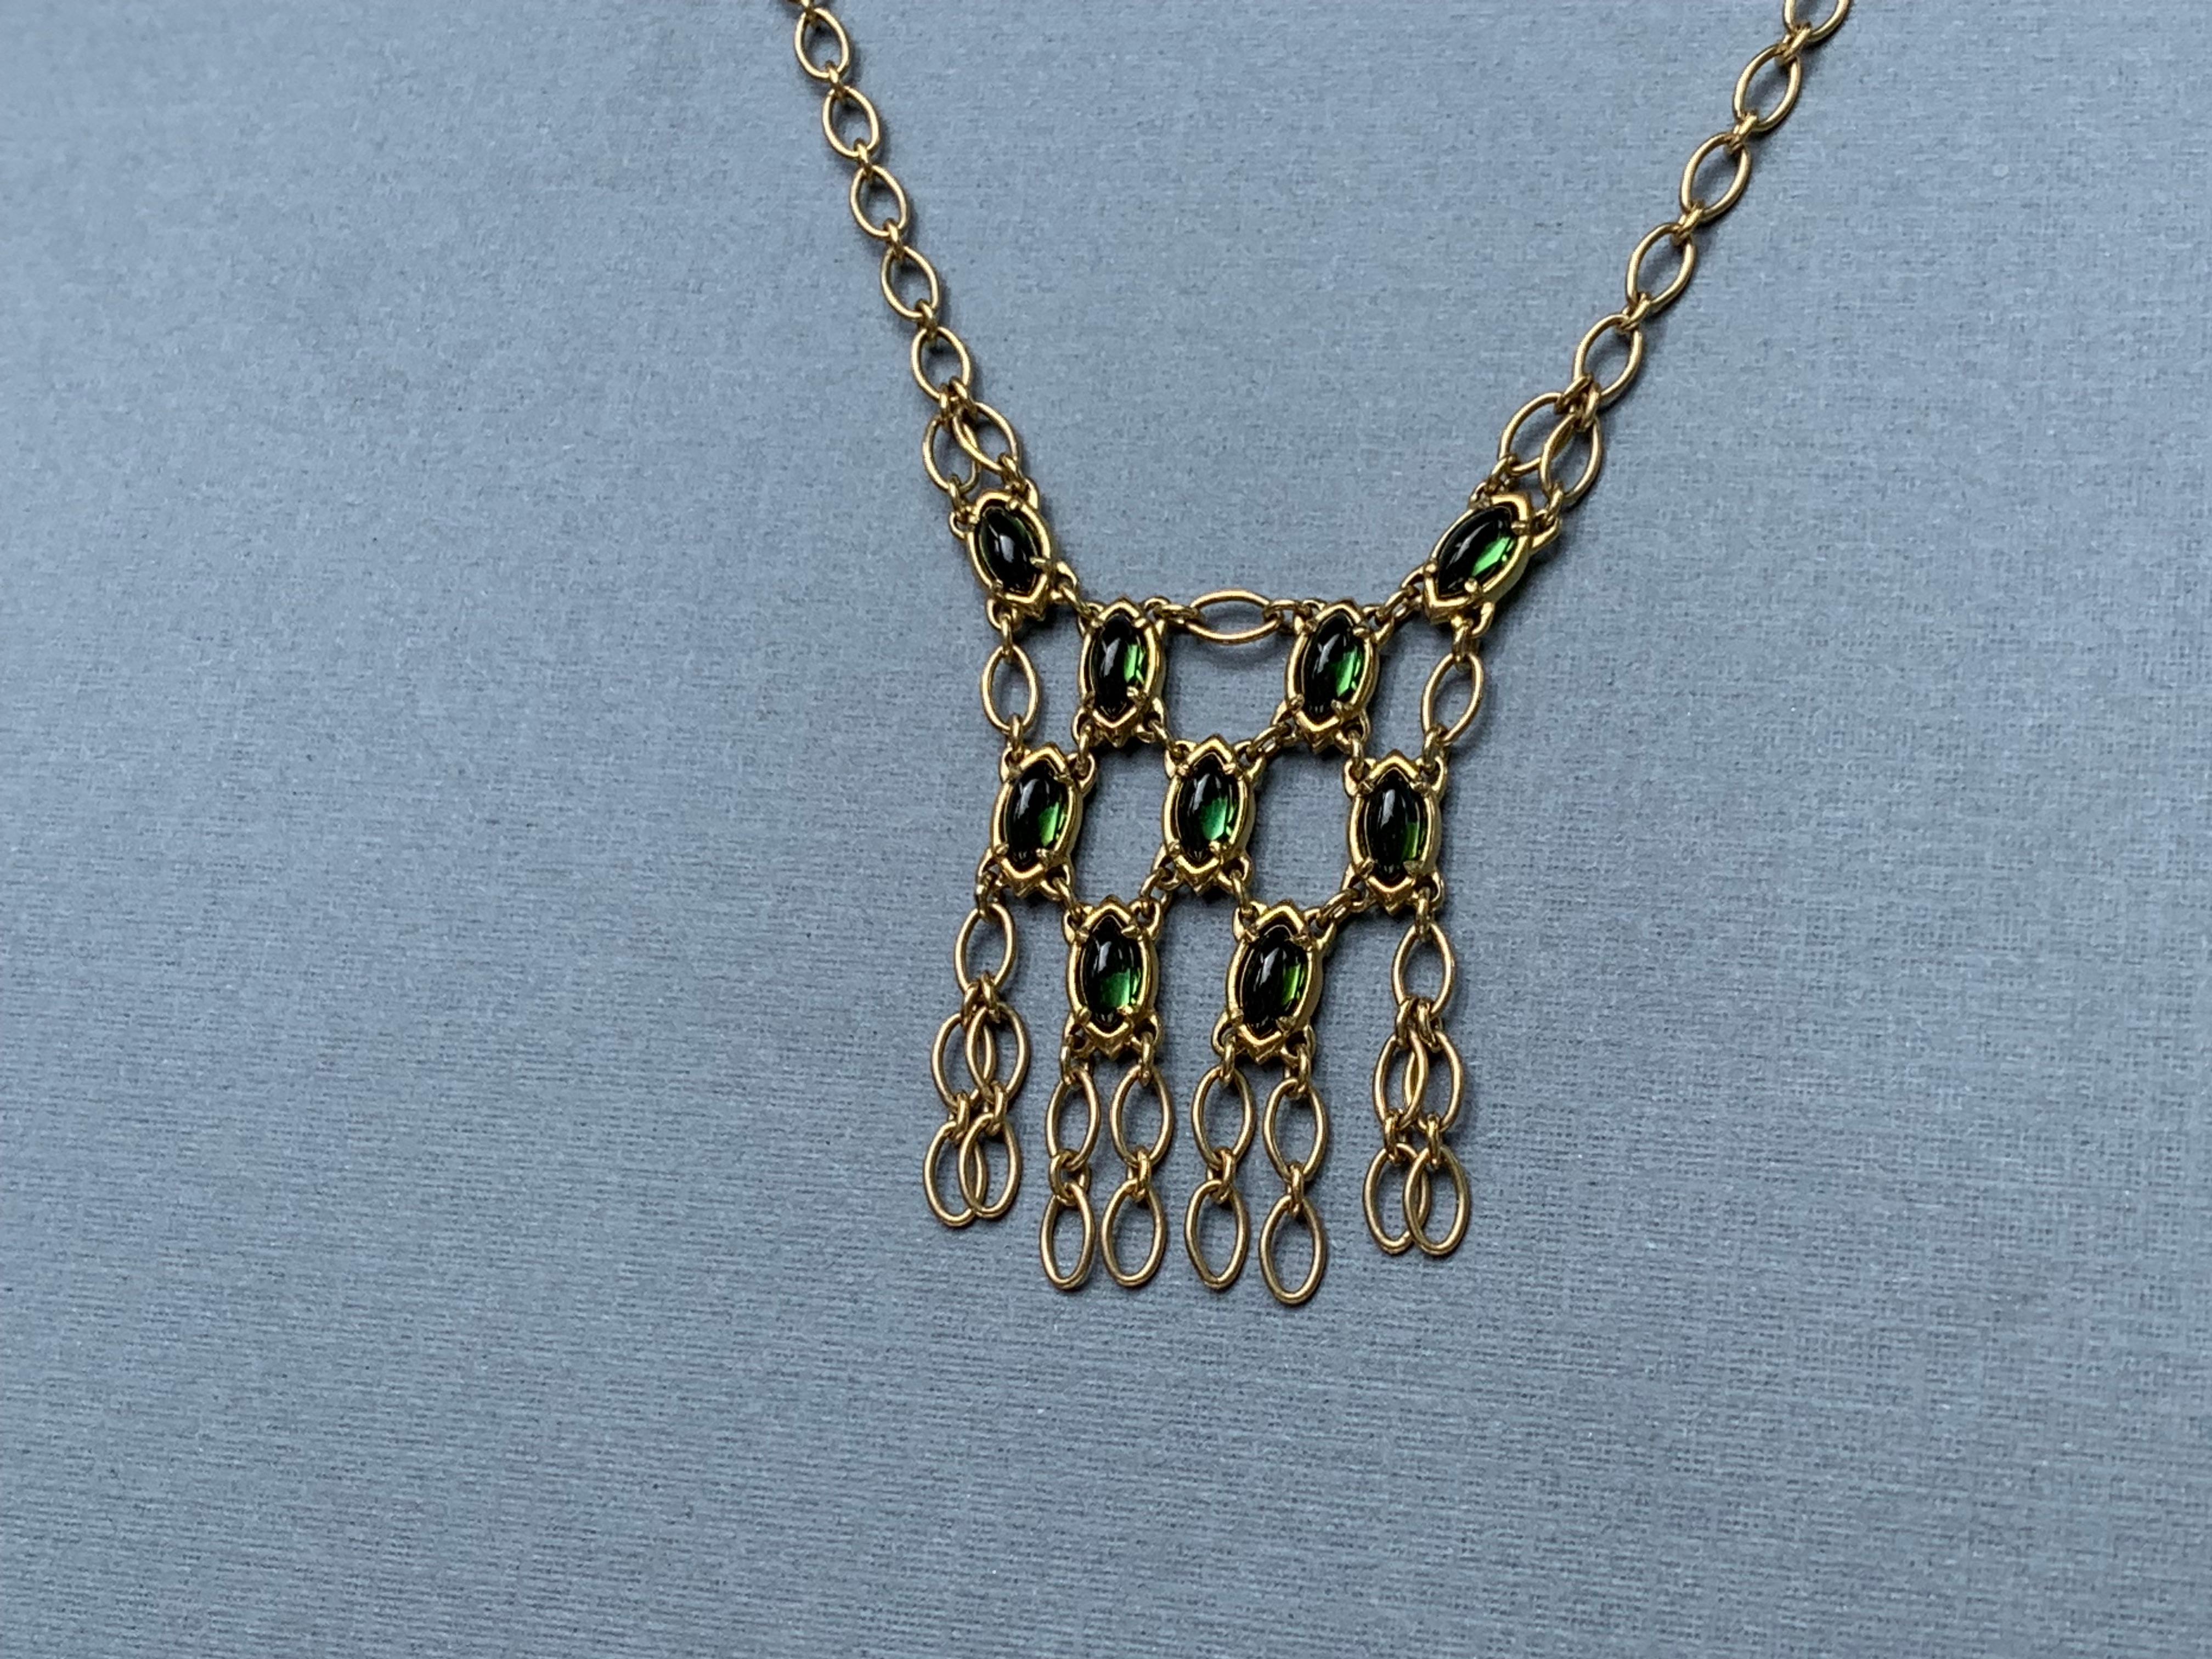 Women's 18kt Gold Mesh Chain Pendant Necklace with Green Tourmaline Marquise Cabochon For Sale